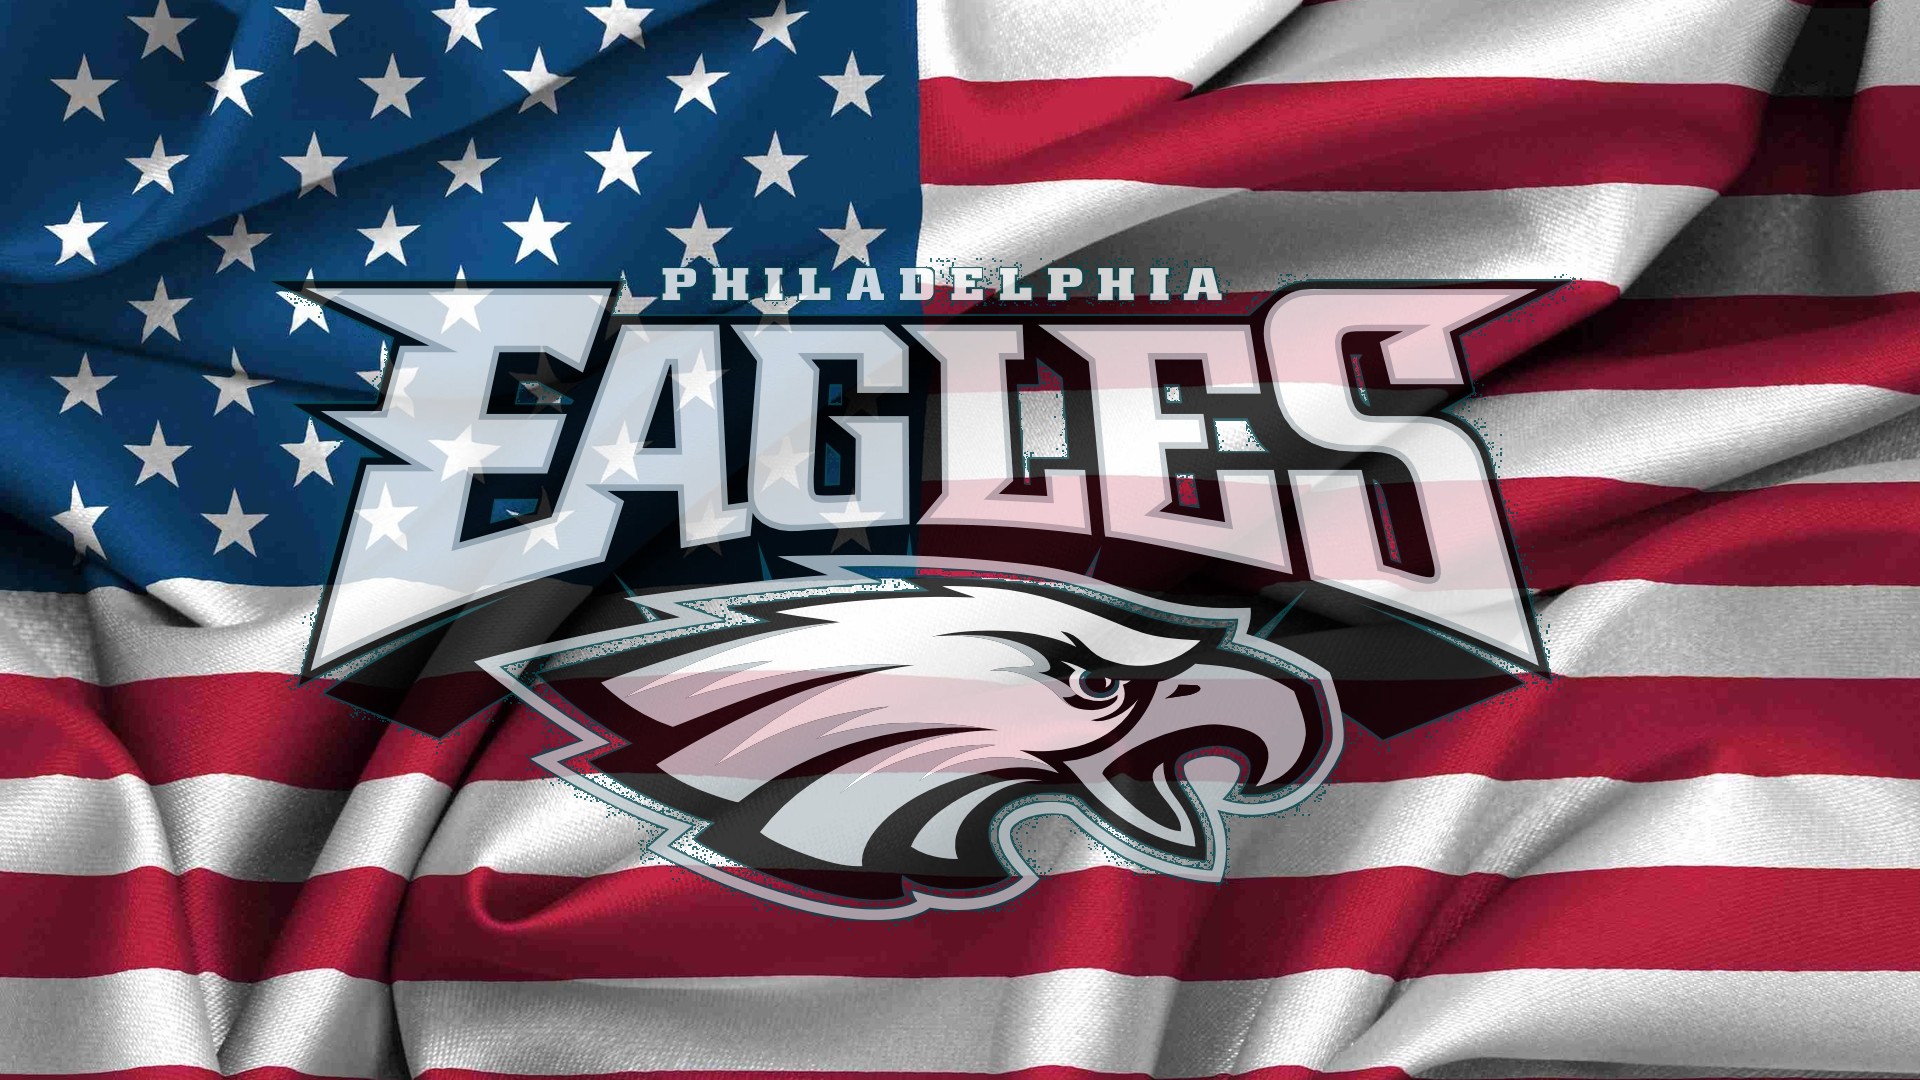 Philadelphia Eagles Logo Hd Wallpapers Pictures To Like Or Share ...